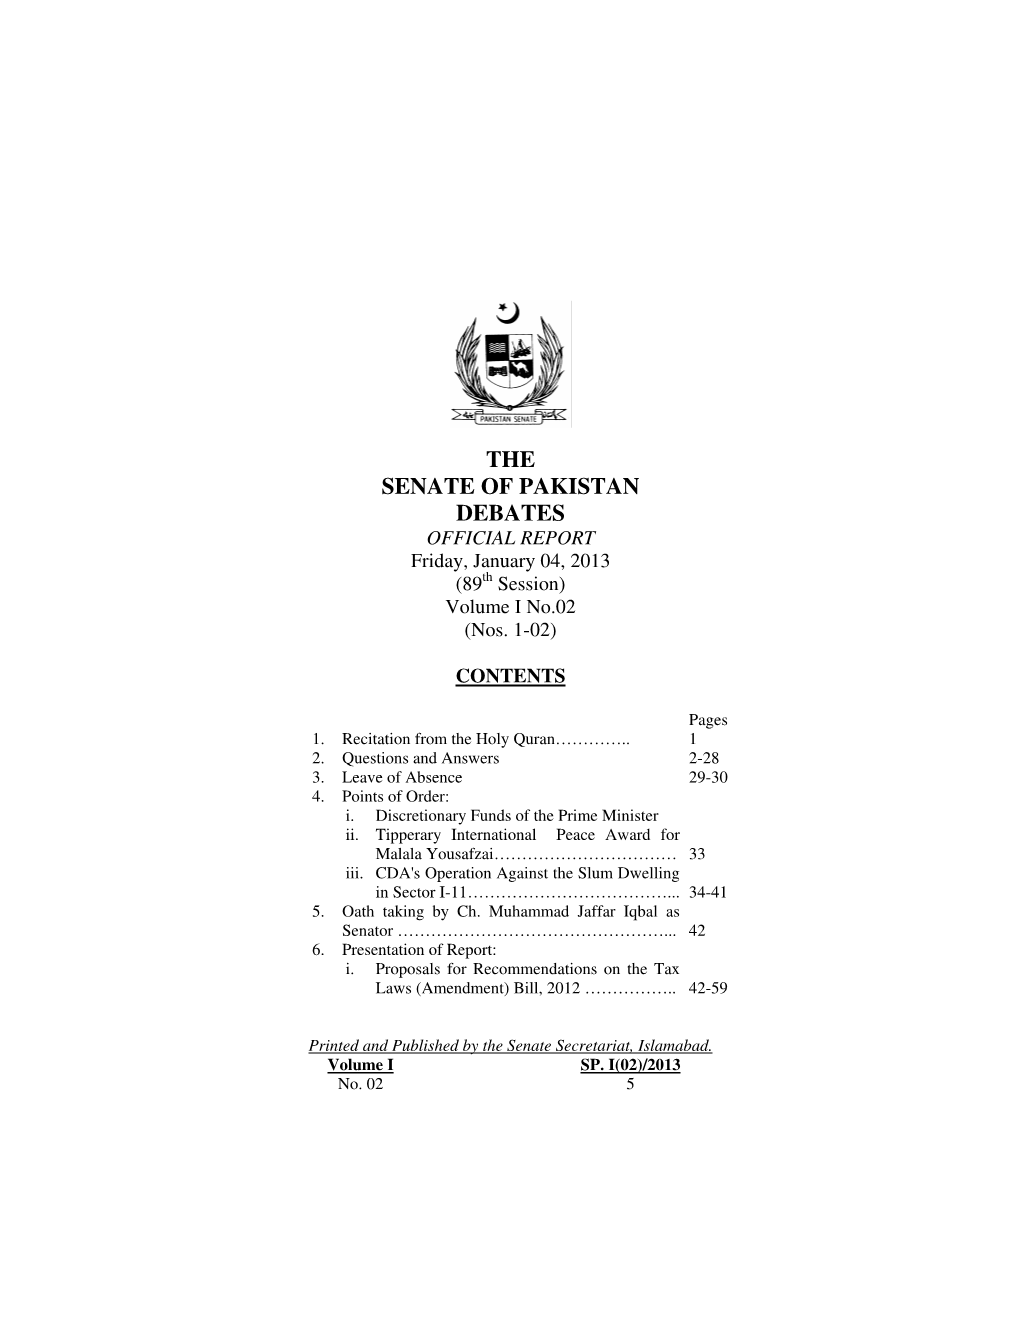 THE SENATE of PAKISTAN DEBATES OFFICIAL REPORT Friday, January 04, 2013 (89 Th Session) Volume I No.02 (Nos